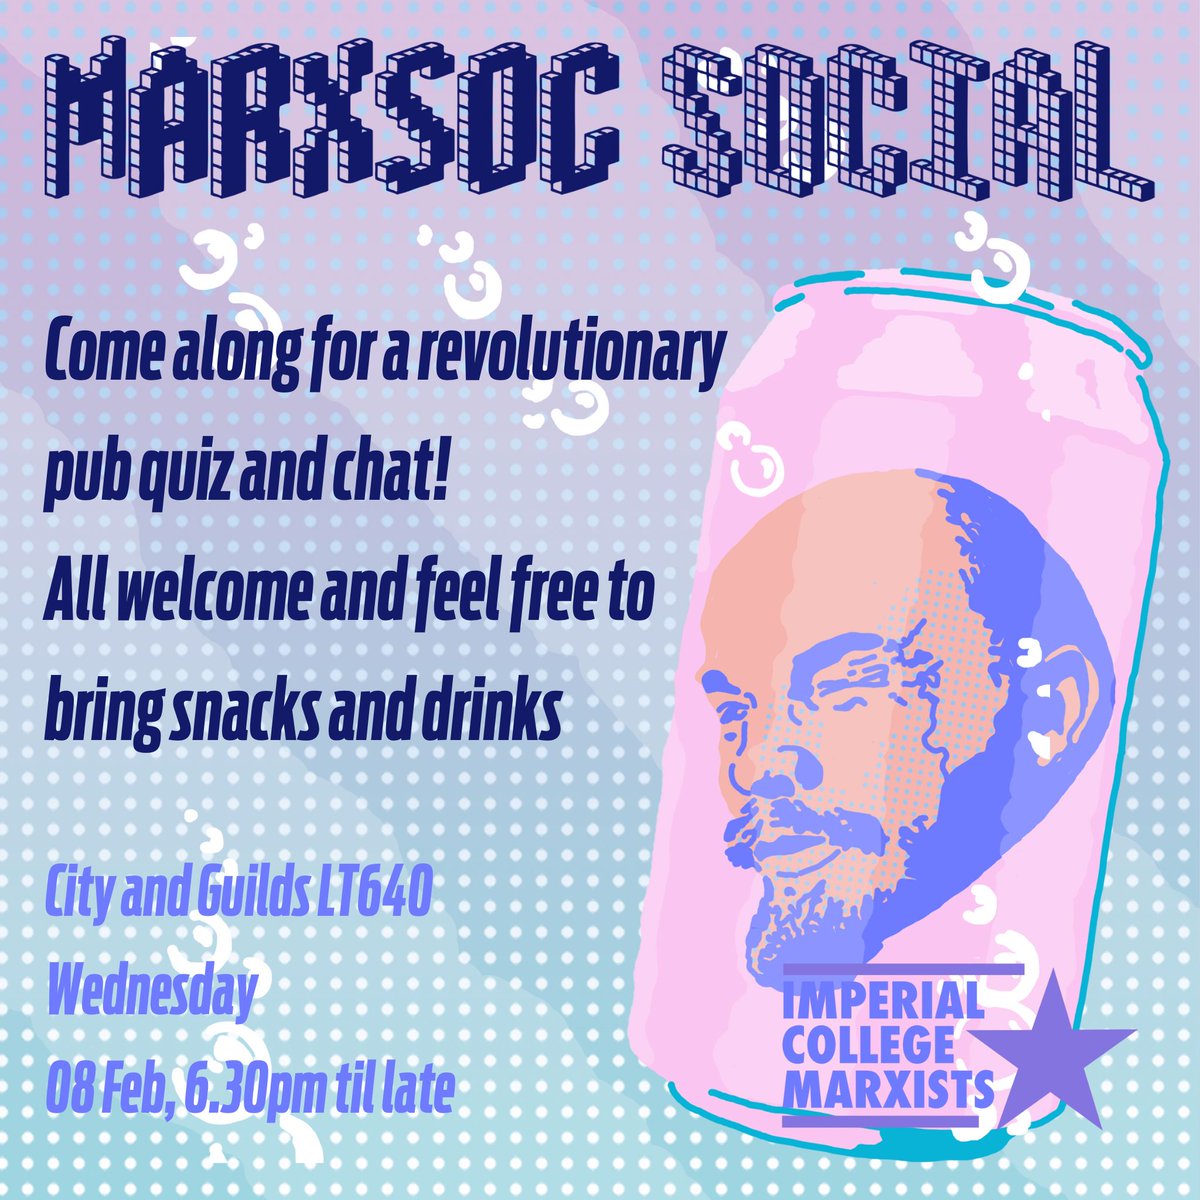 Come to our pub quiz social tomorrow! We'll be chatting about the strikewave, revolutionary history, and how we can overthrow capitalism. All workers and students are welcome.